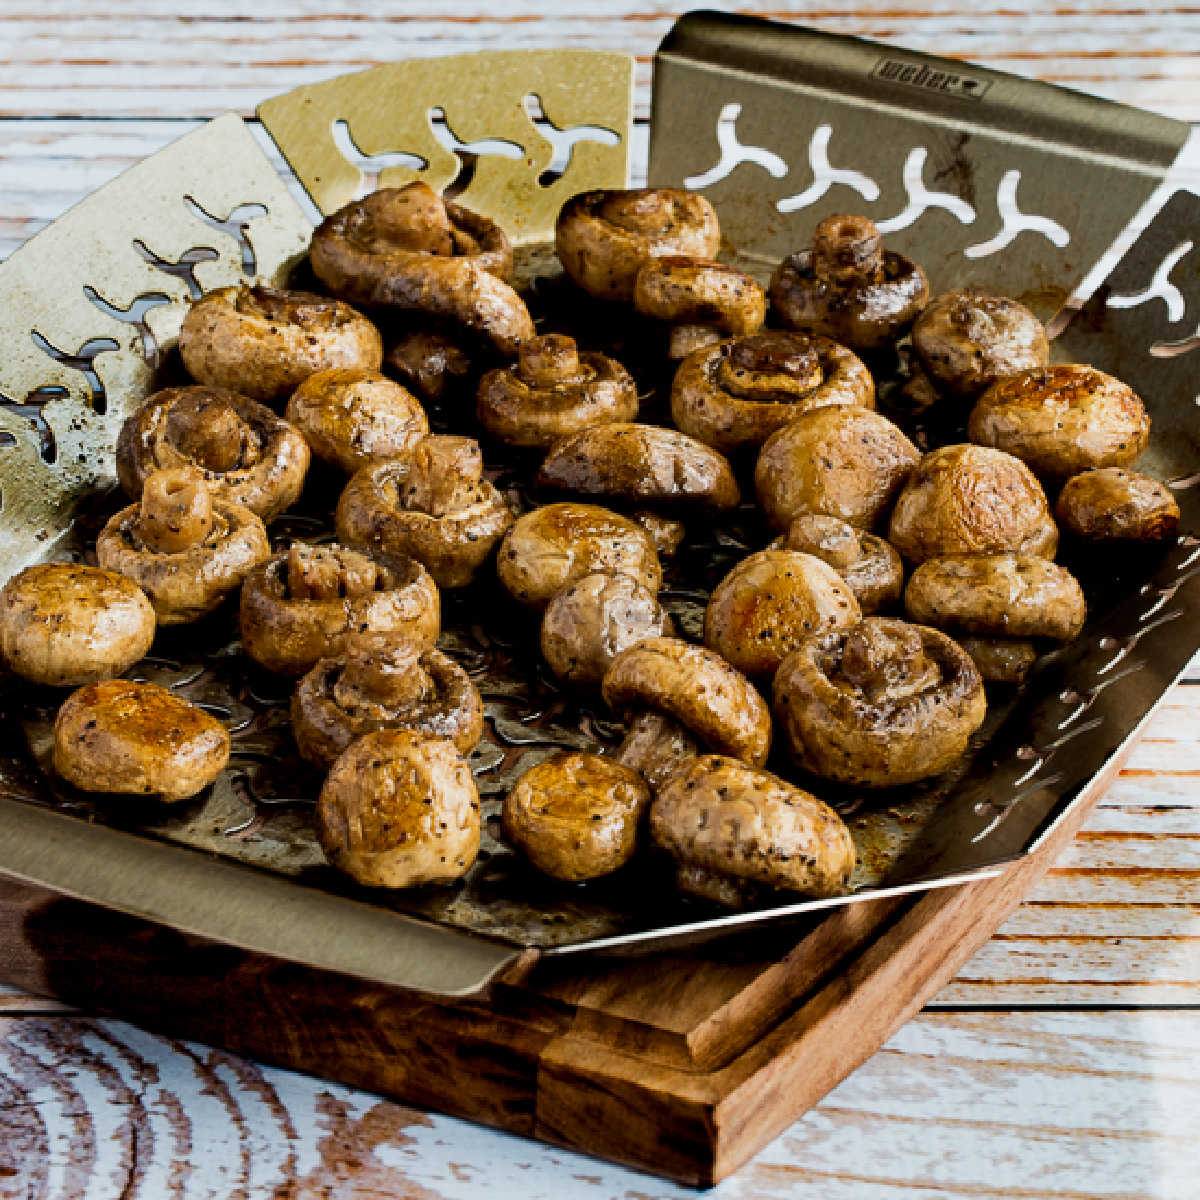 Square image of grilled mushrooms shown in grilling pan with holes.